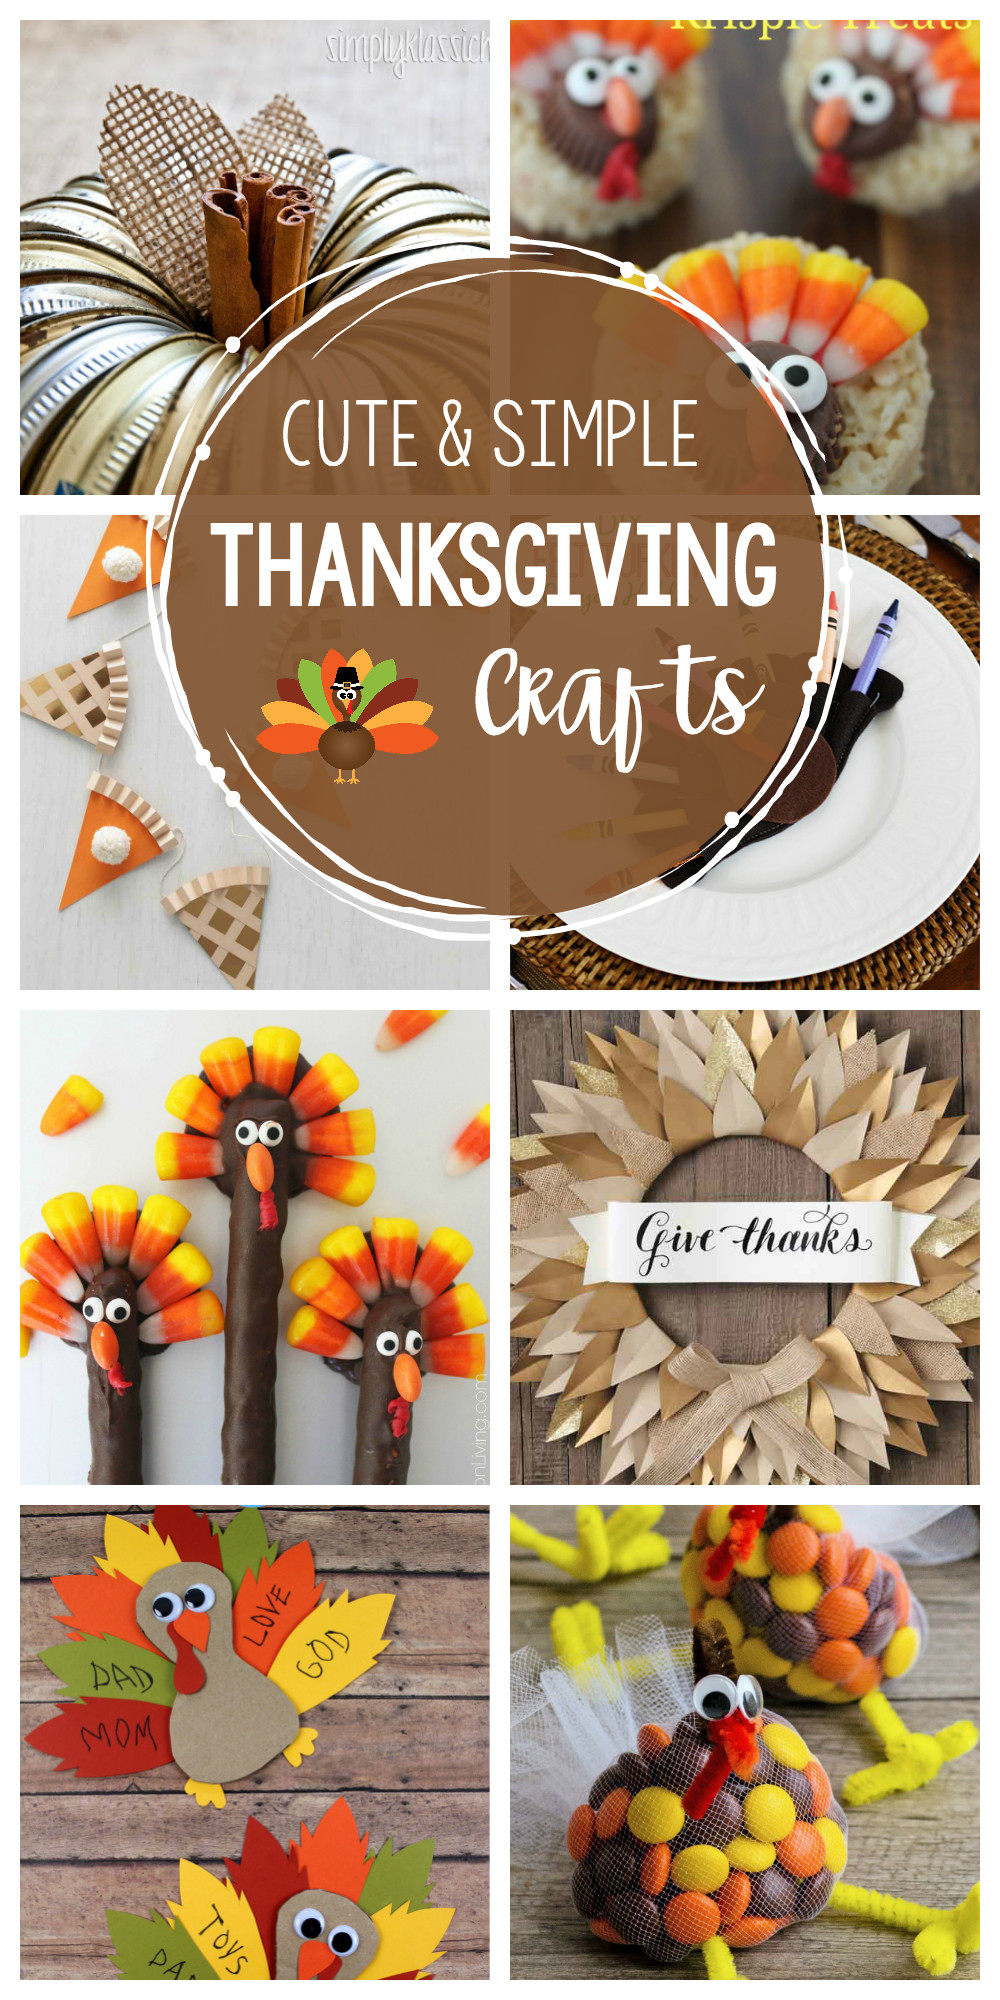 Craft For Kids Thanksgiving
 Fun & Simple Thanksgiving Crafts to Make This Year Crazy